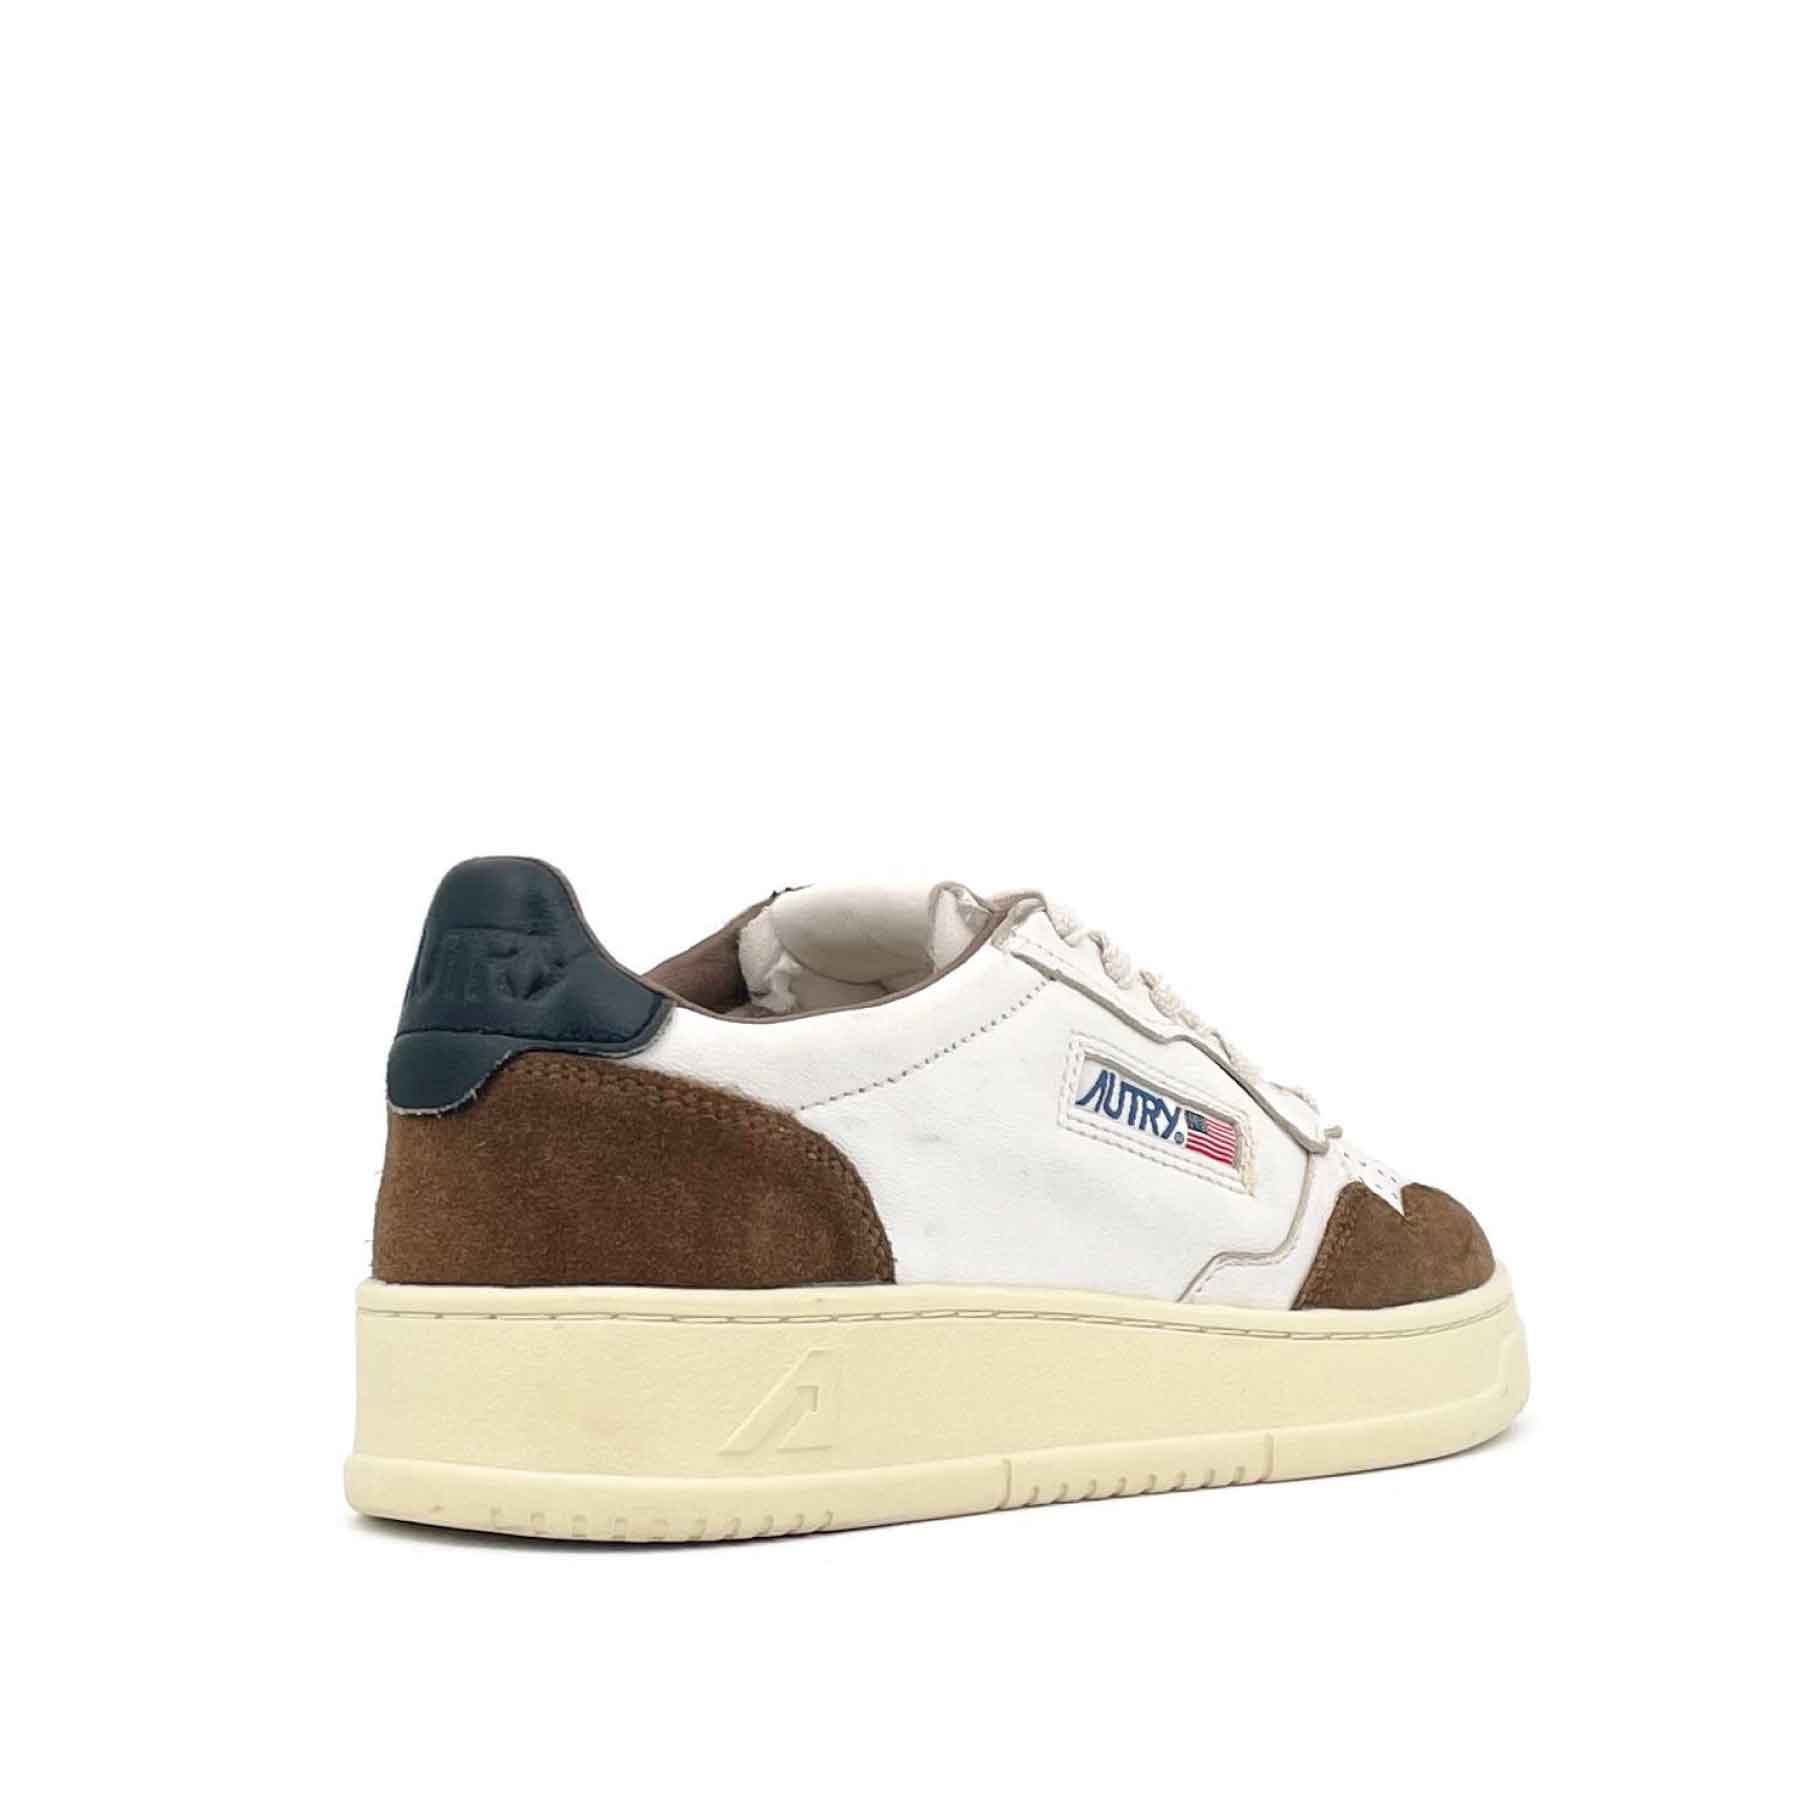 01 Medalist Low W White Goat Leather Cigar Suede / Black